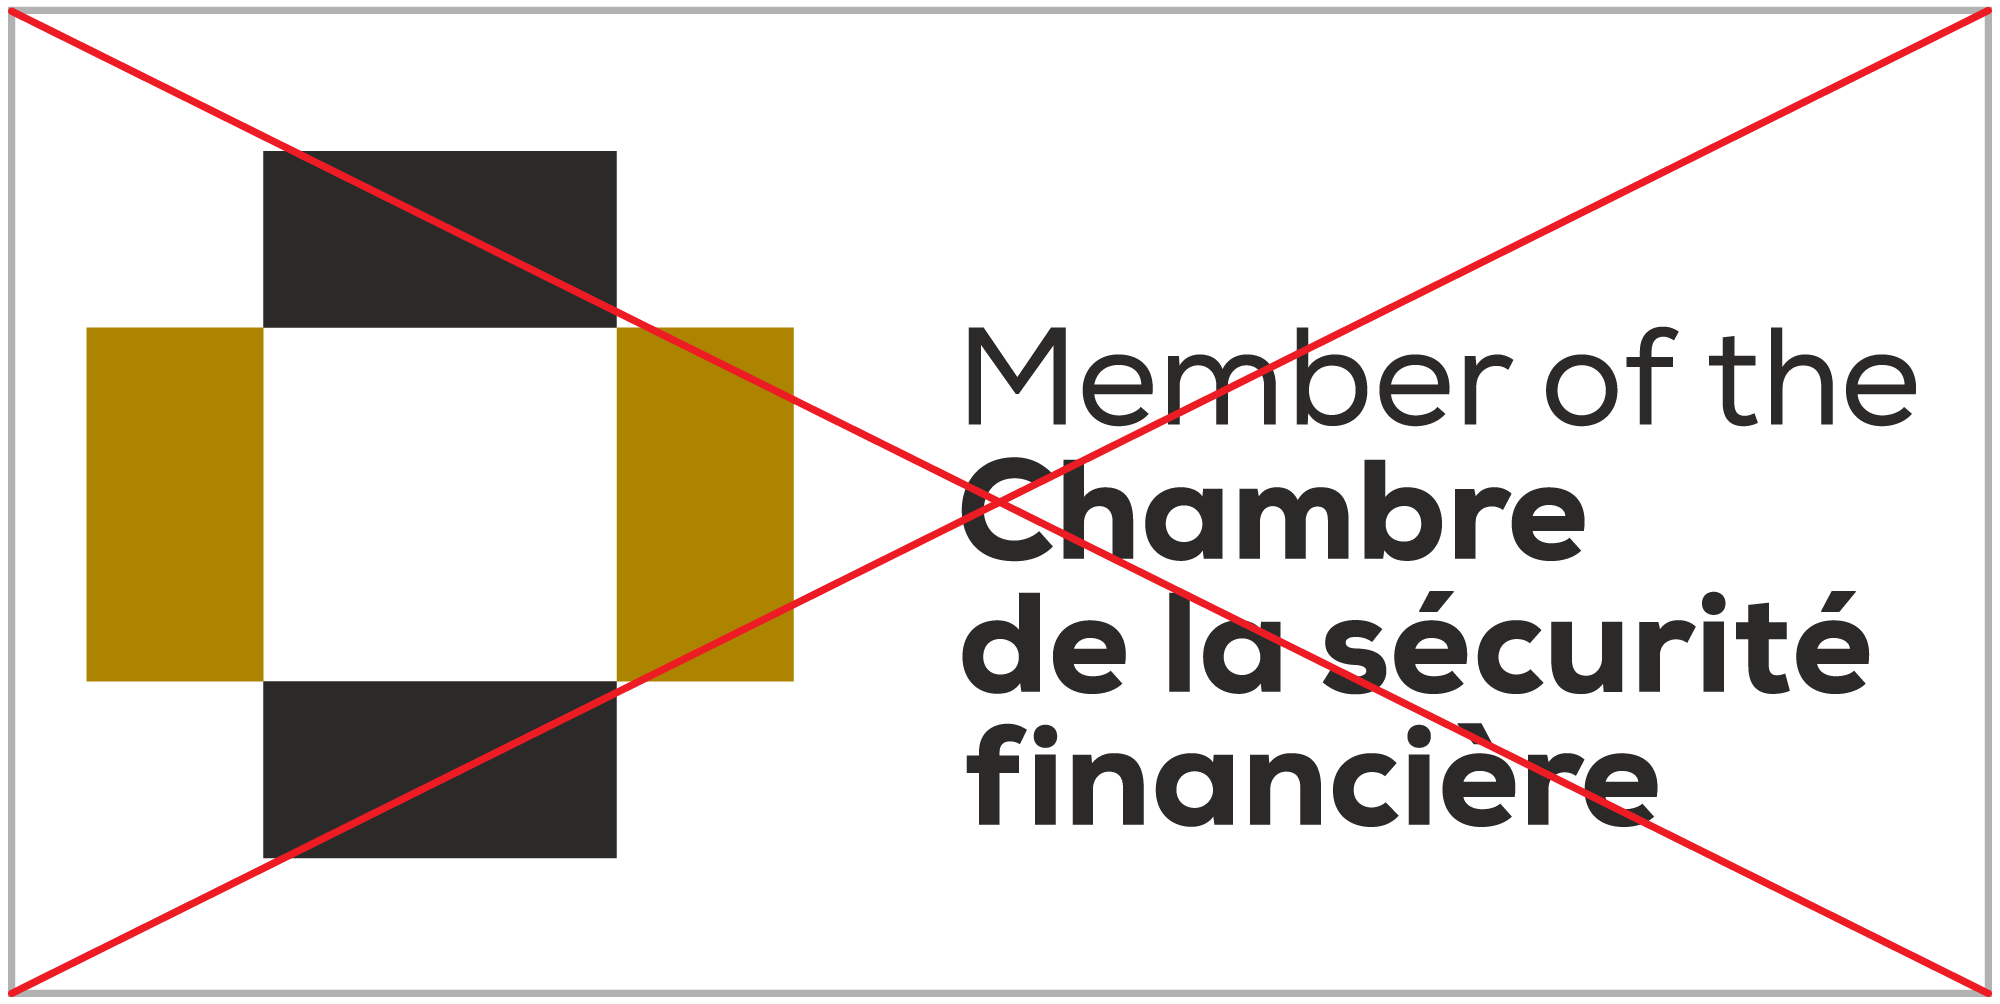 Symbol proportion altered in relation to the signature